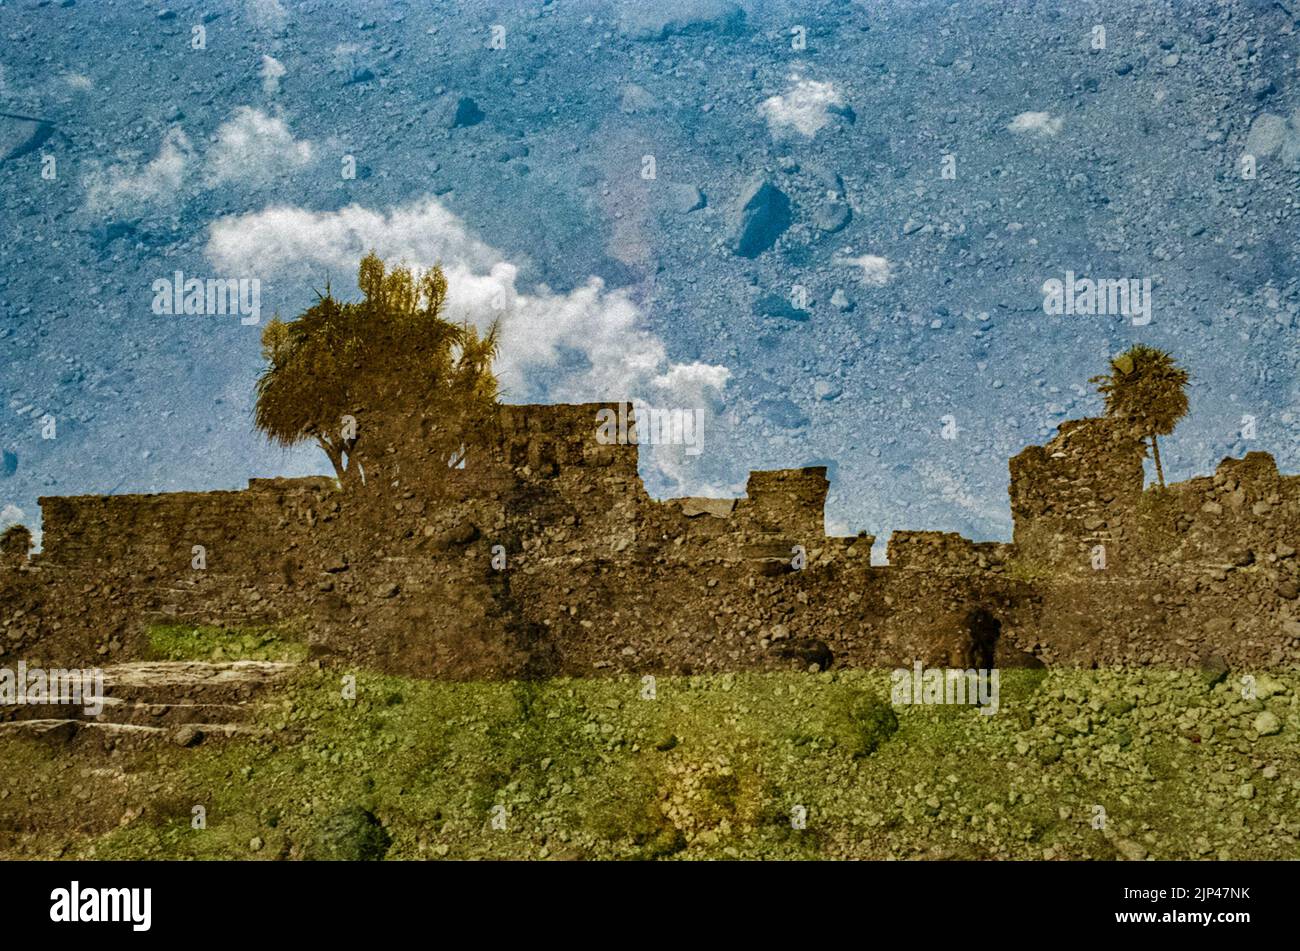 Double exposre from the Ancient Mayan ruins at Tulum's Archaeological Zone in Tulum, Quintana Roo, Mexico. Stock Photo